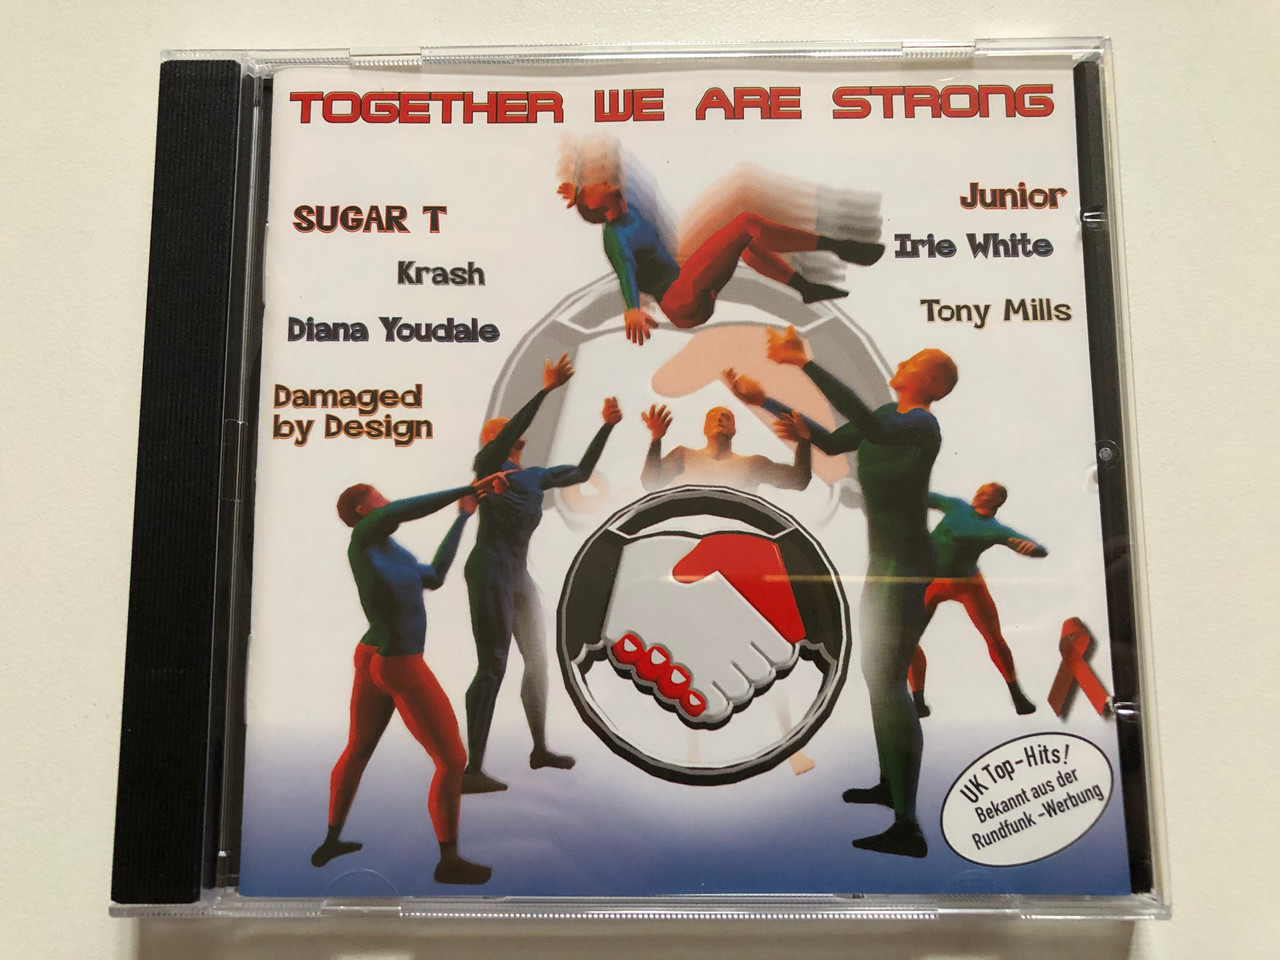 https://cdn10.bigcommerce.com/s-62bdpkt7pb/products/0/images/310544/Together_We_Are_Strong_-_Sugar_T_Krash_Diana_Youdale_Damaged_by_Design_Junior_Irie_White_Tony_Mills_Masonic_Records_Audio_CD_193201-2_1__21105.1699384681.1280.1280.JPG?c=2